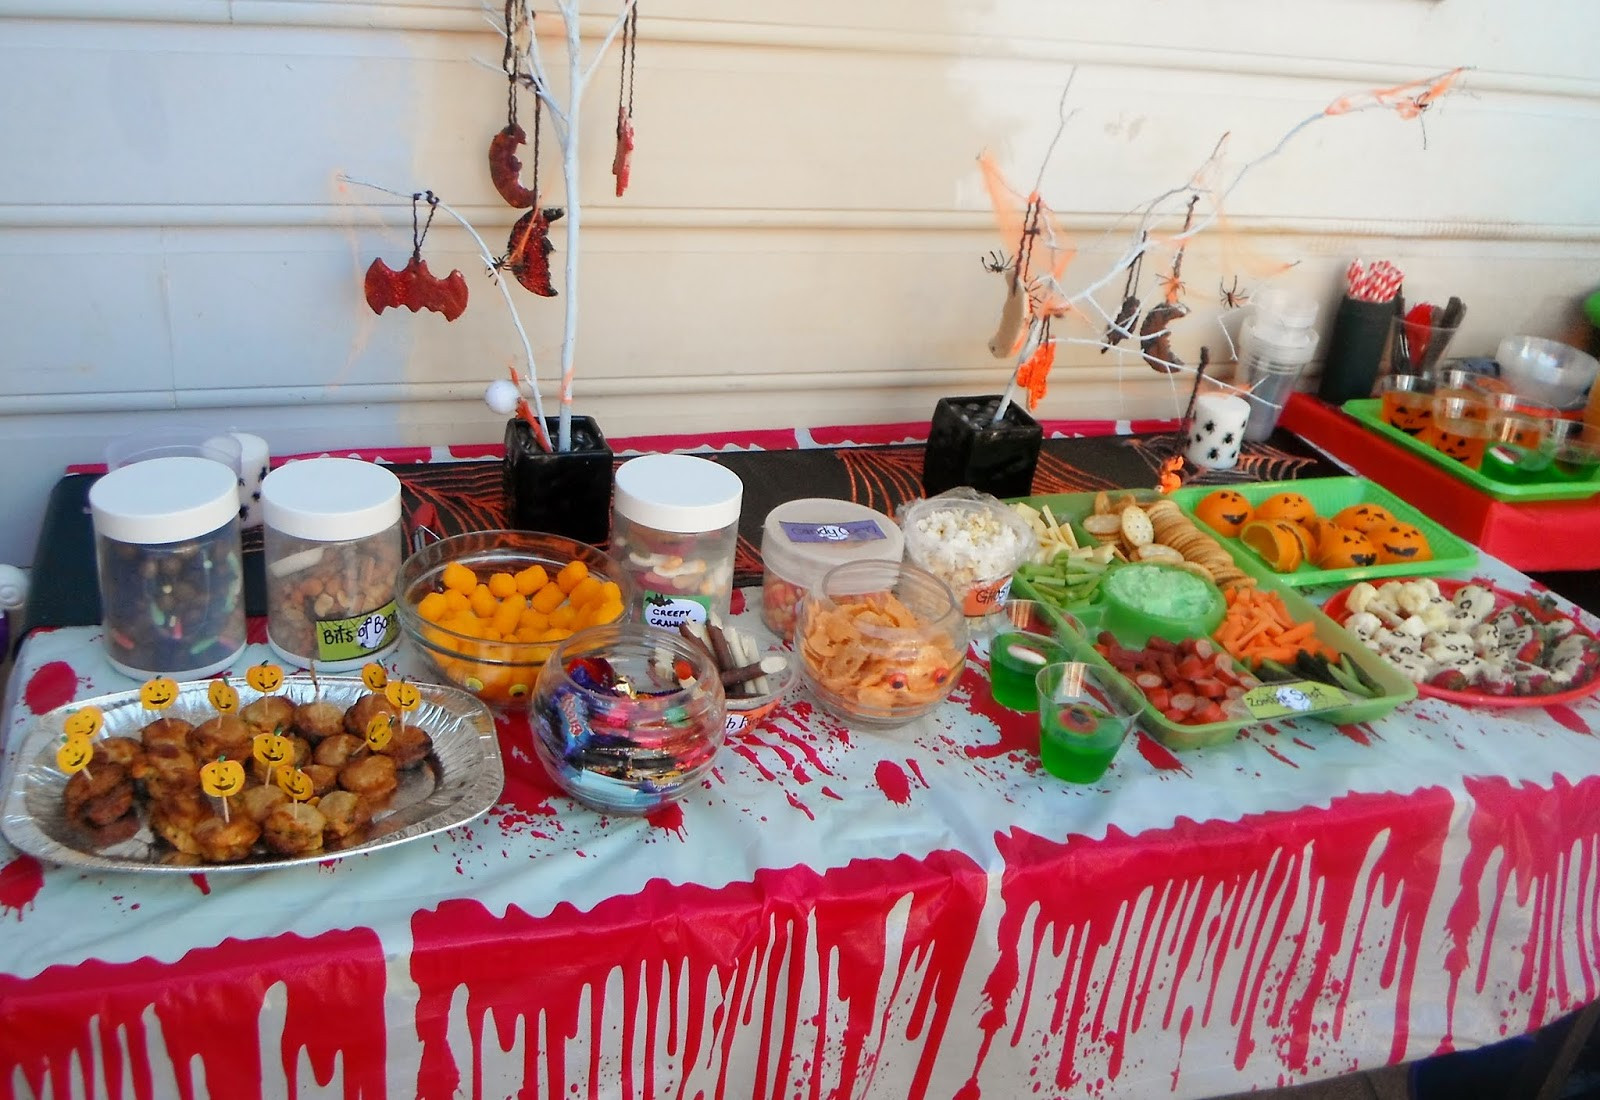 Fun Halloween Party Ideas For Kids
 Adventures at home with Mum Halloween Party Food